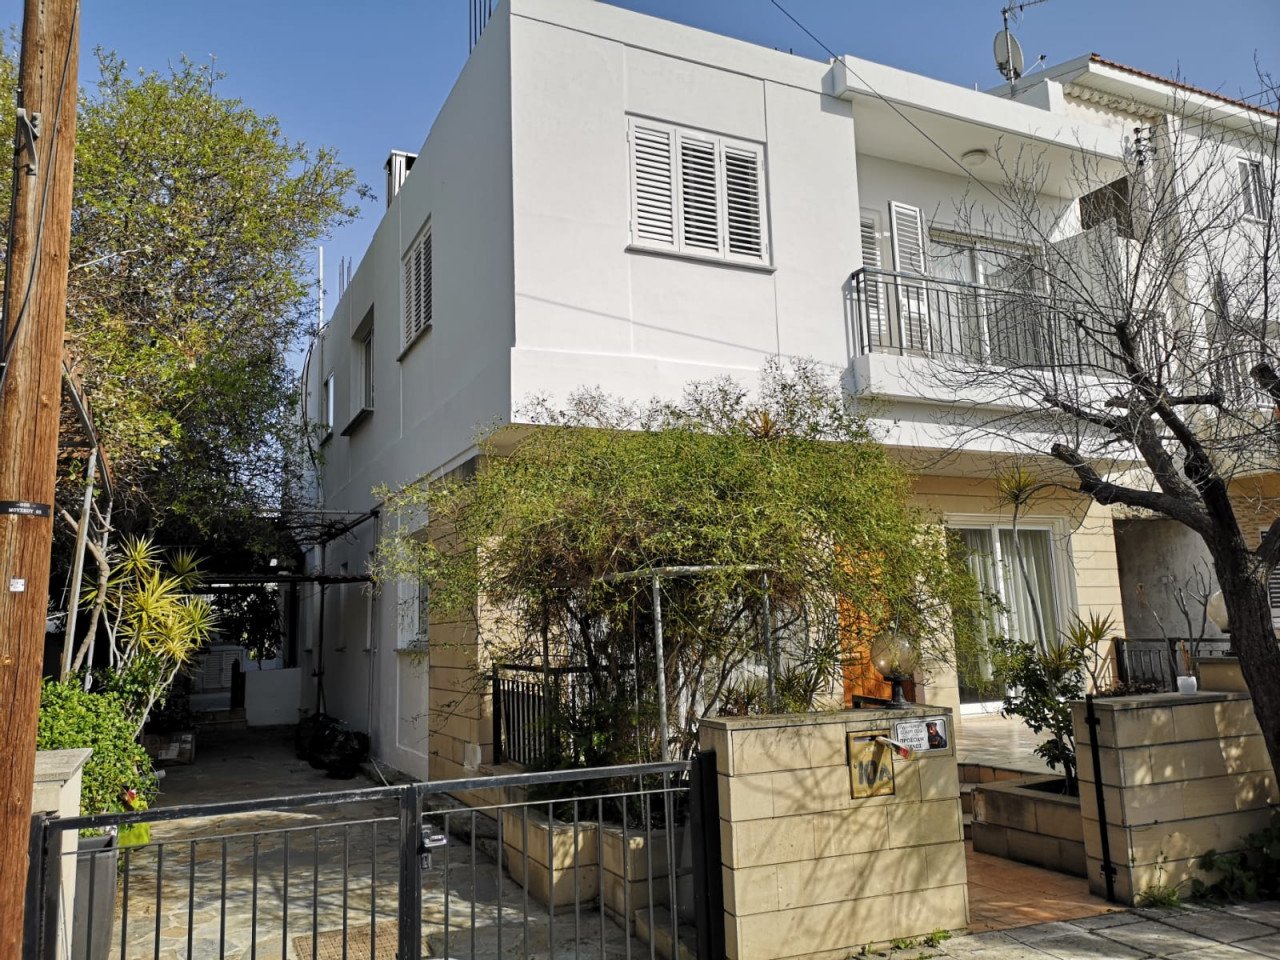 Property for Rent: House (Detached) in Agios Dometios, Nicosia for Rent | Key Realtor Cyprus